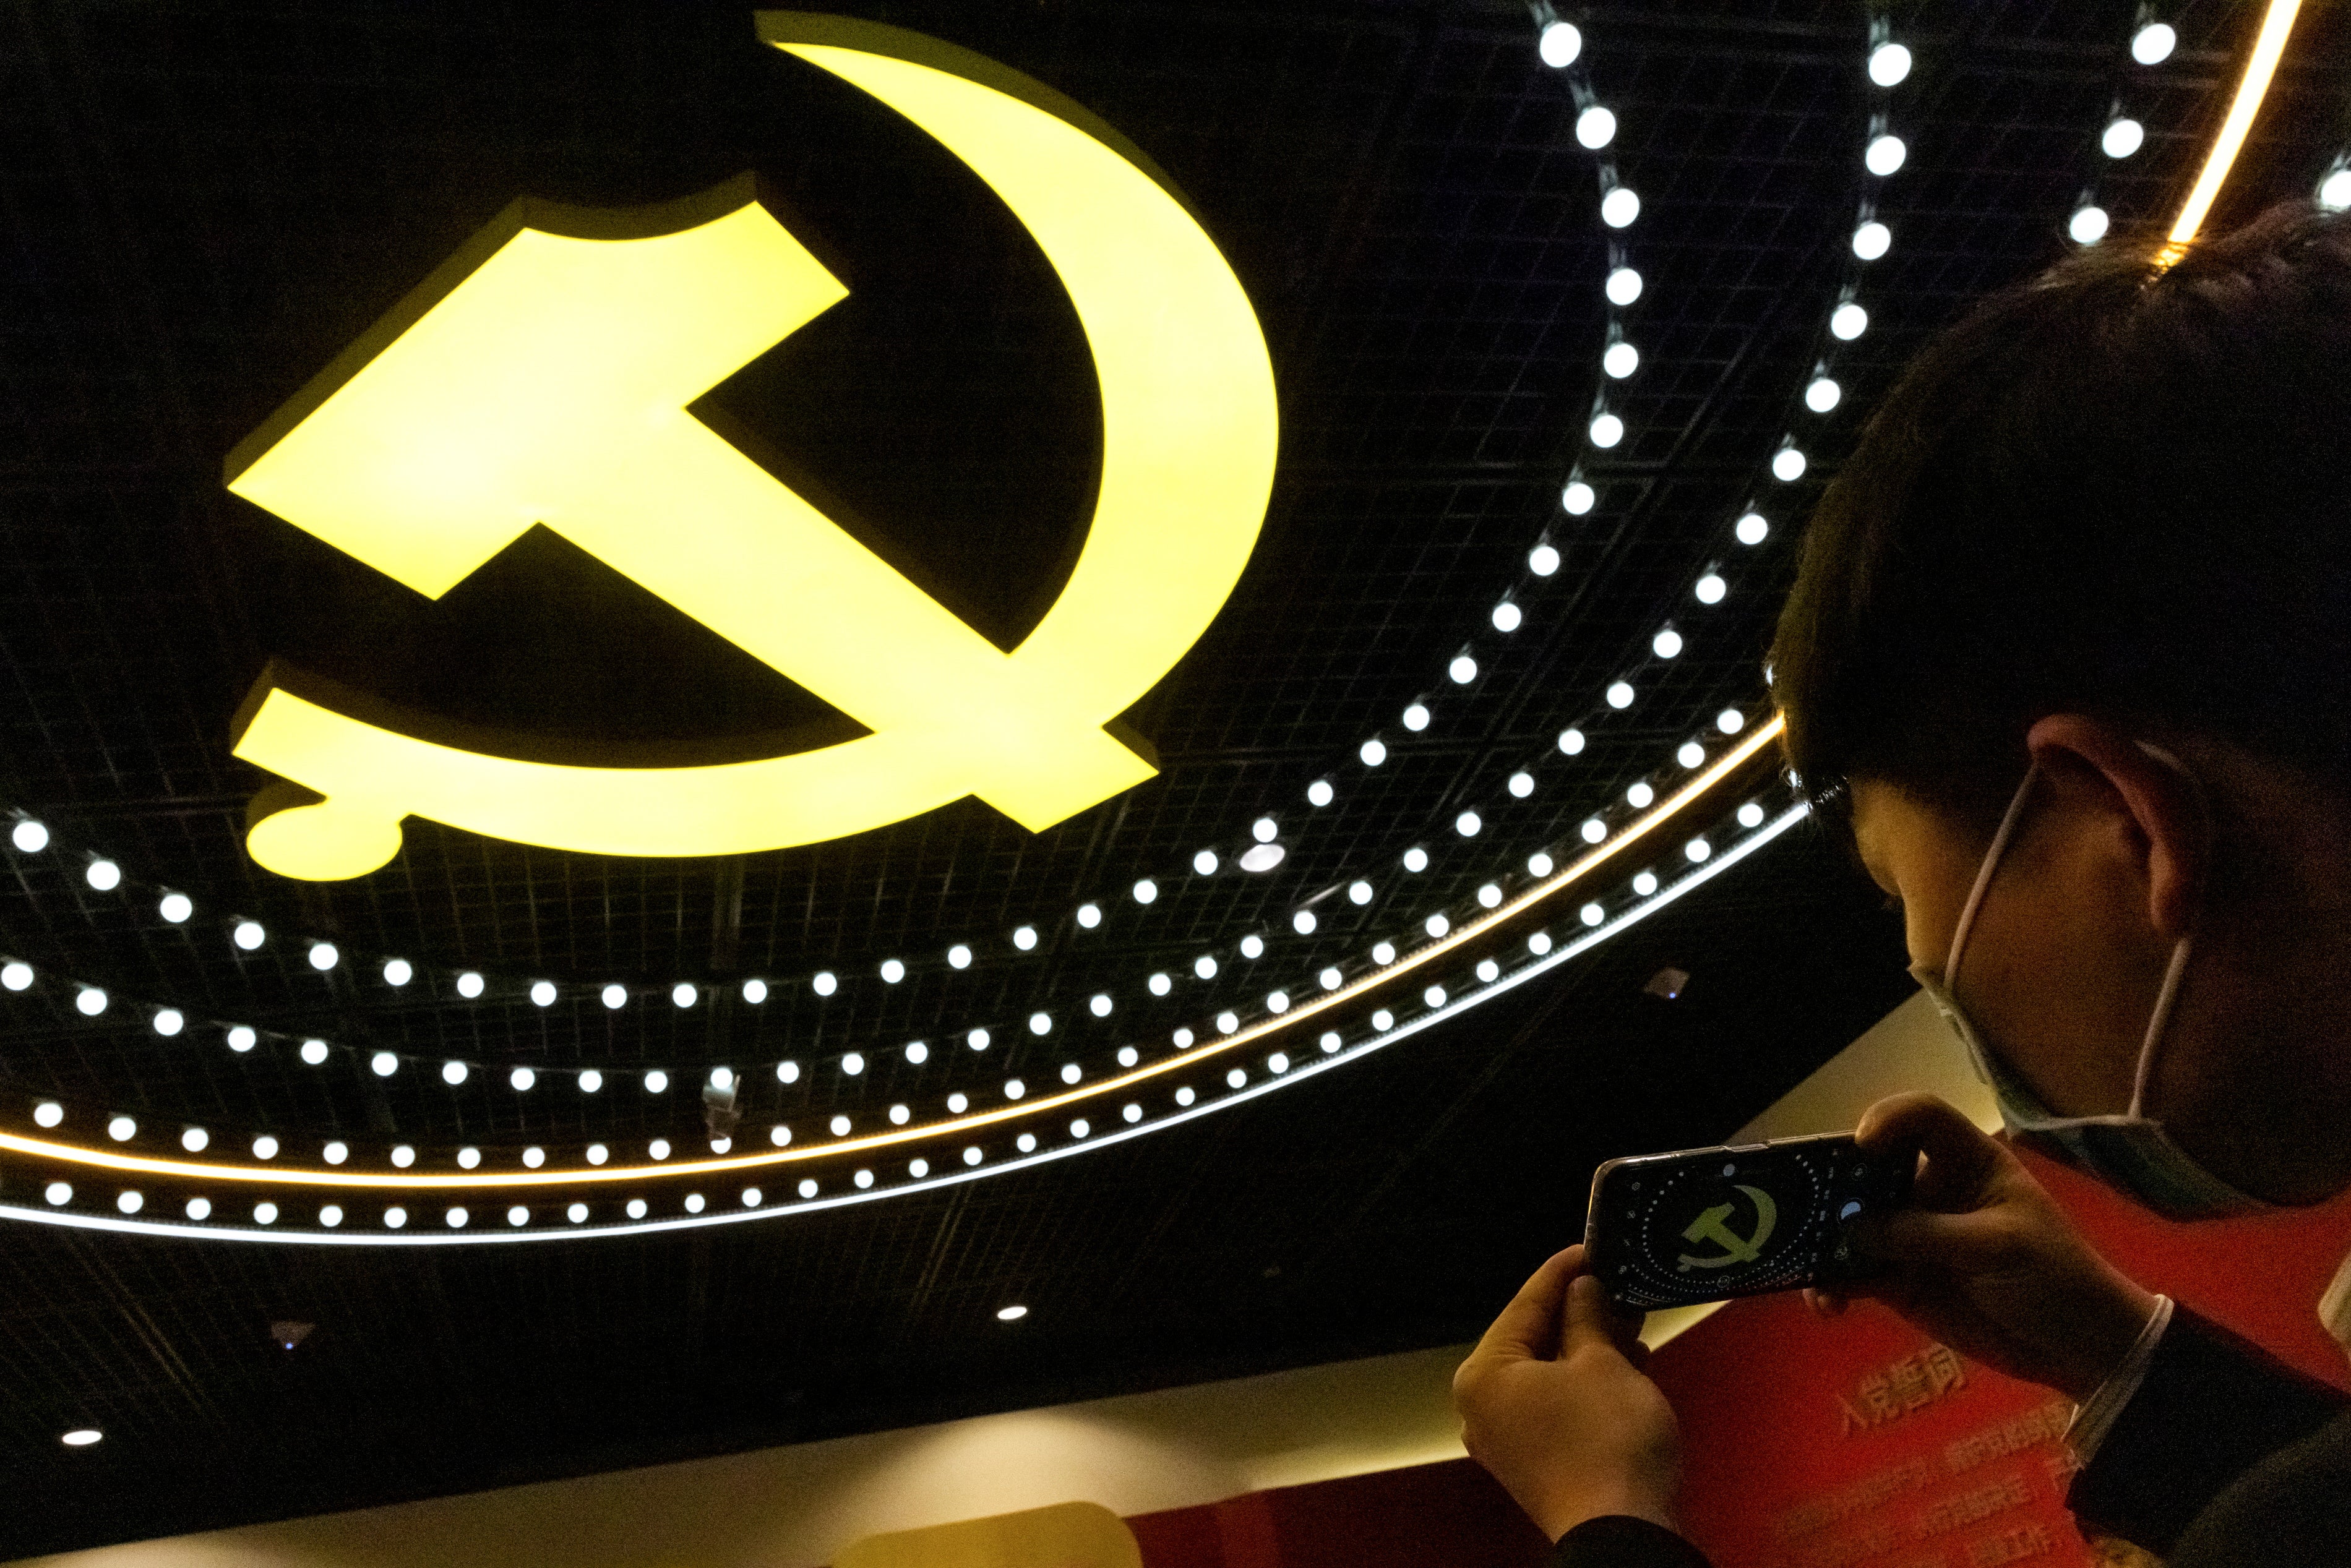 File image: A man takes a picture of the emblem of Chinese Communist Party (CCP) at an exhibition marking the party's 100th founding anniversary in Beijing, China